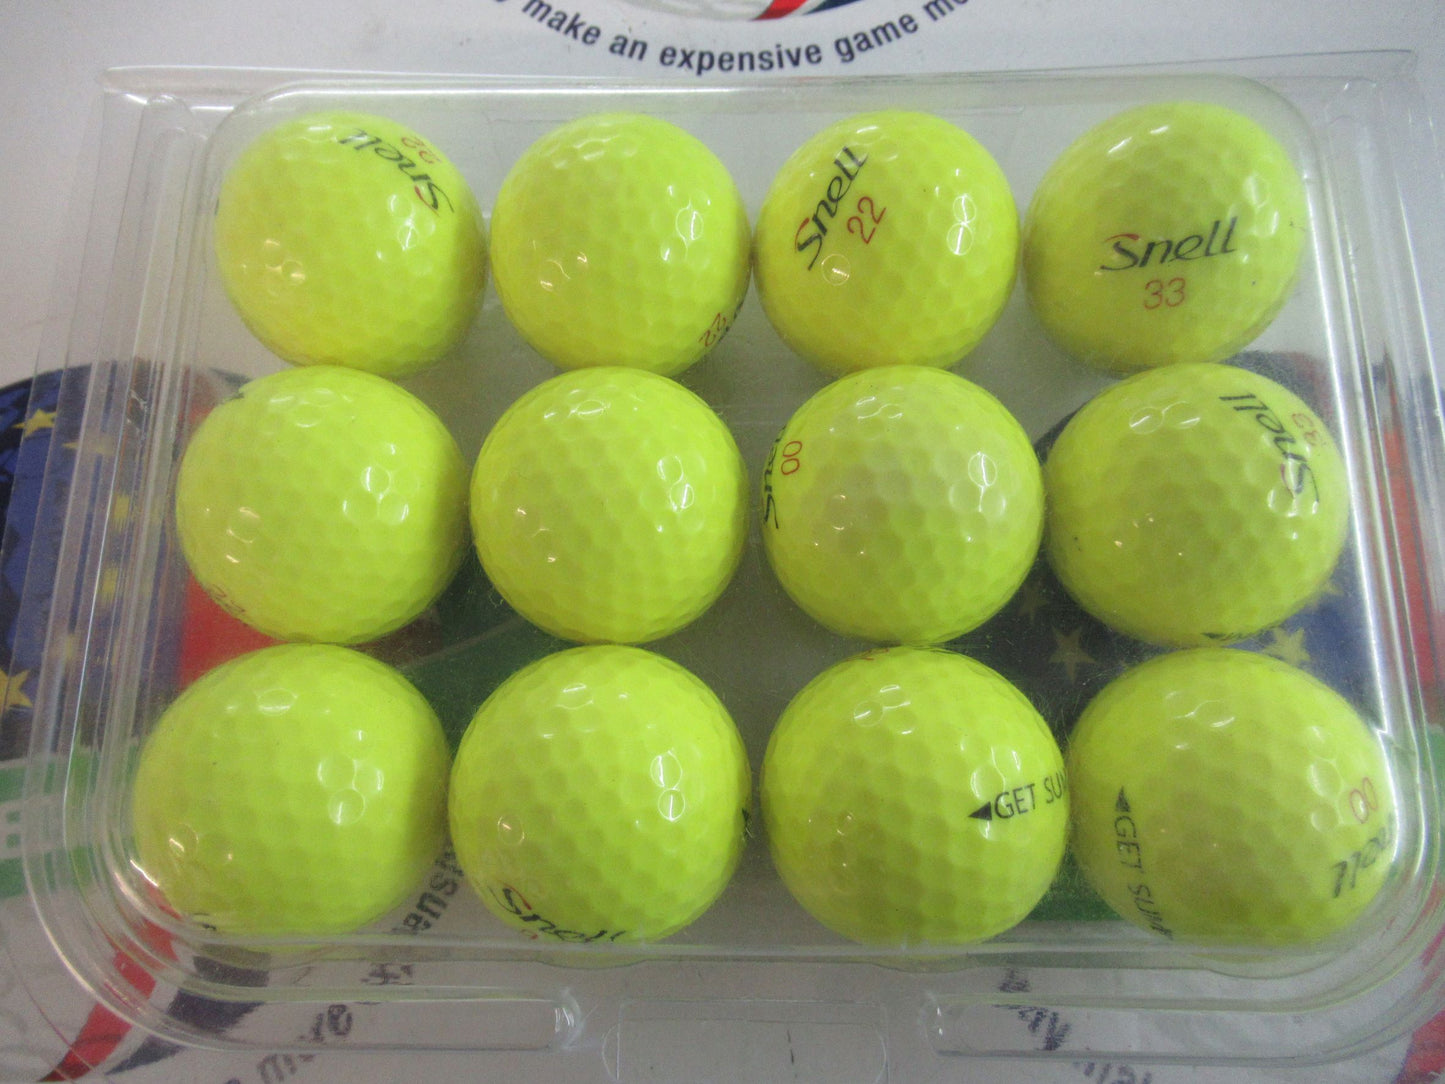 SNELL GET SUM OPTIC YELLOW PEARL/PEARL 1 GRADE GOLF BALLS